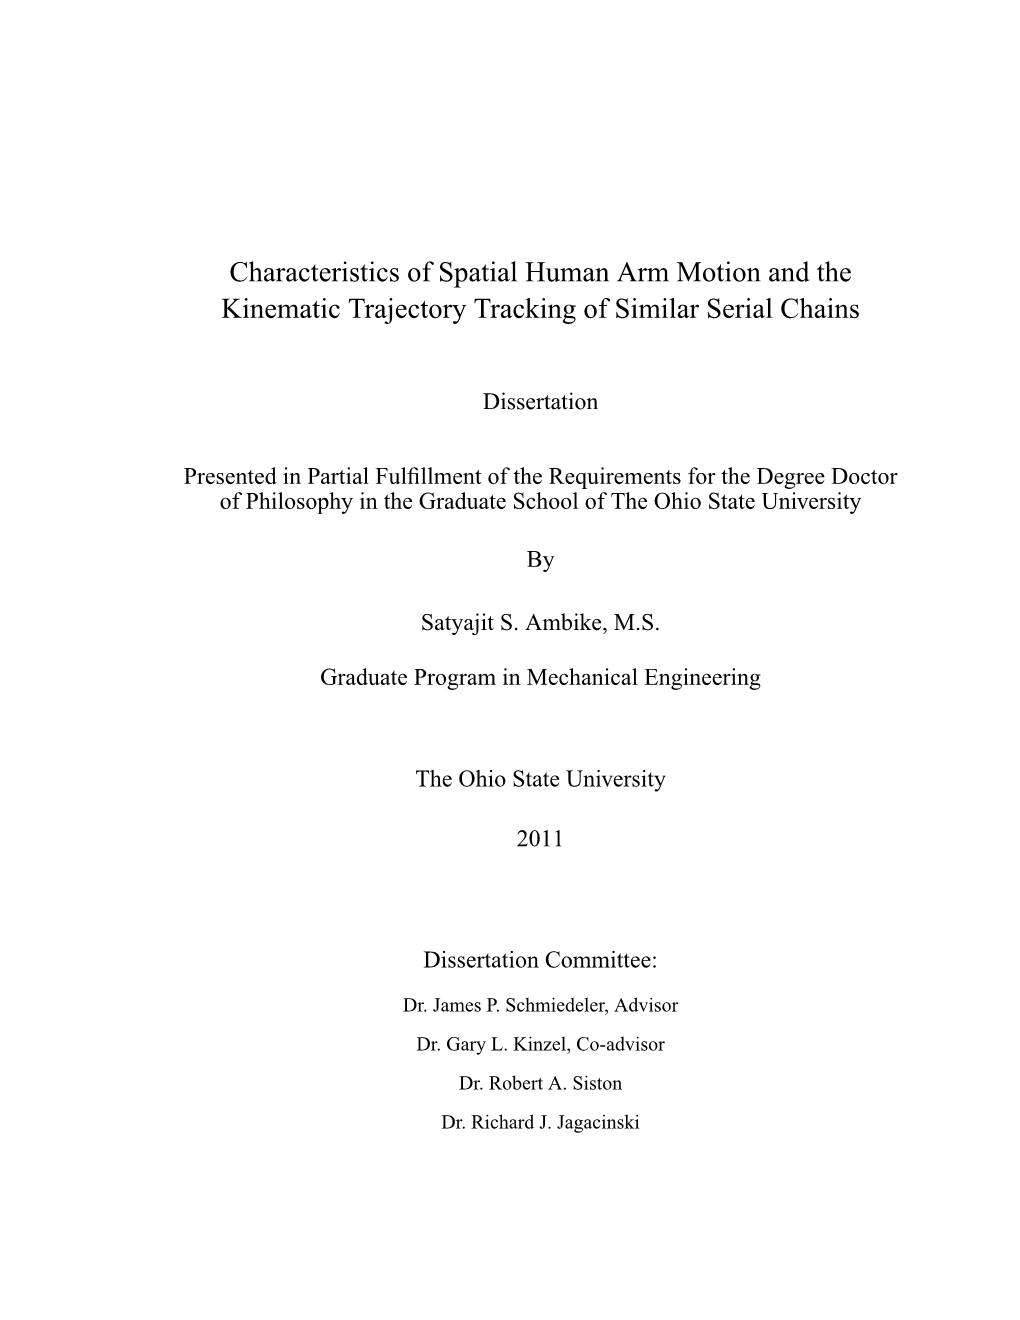 Characteristics of Spatial Human Arm Motion and the Kinematic Trajectory Tracking of Similar Serial Chains